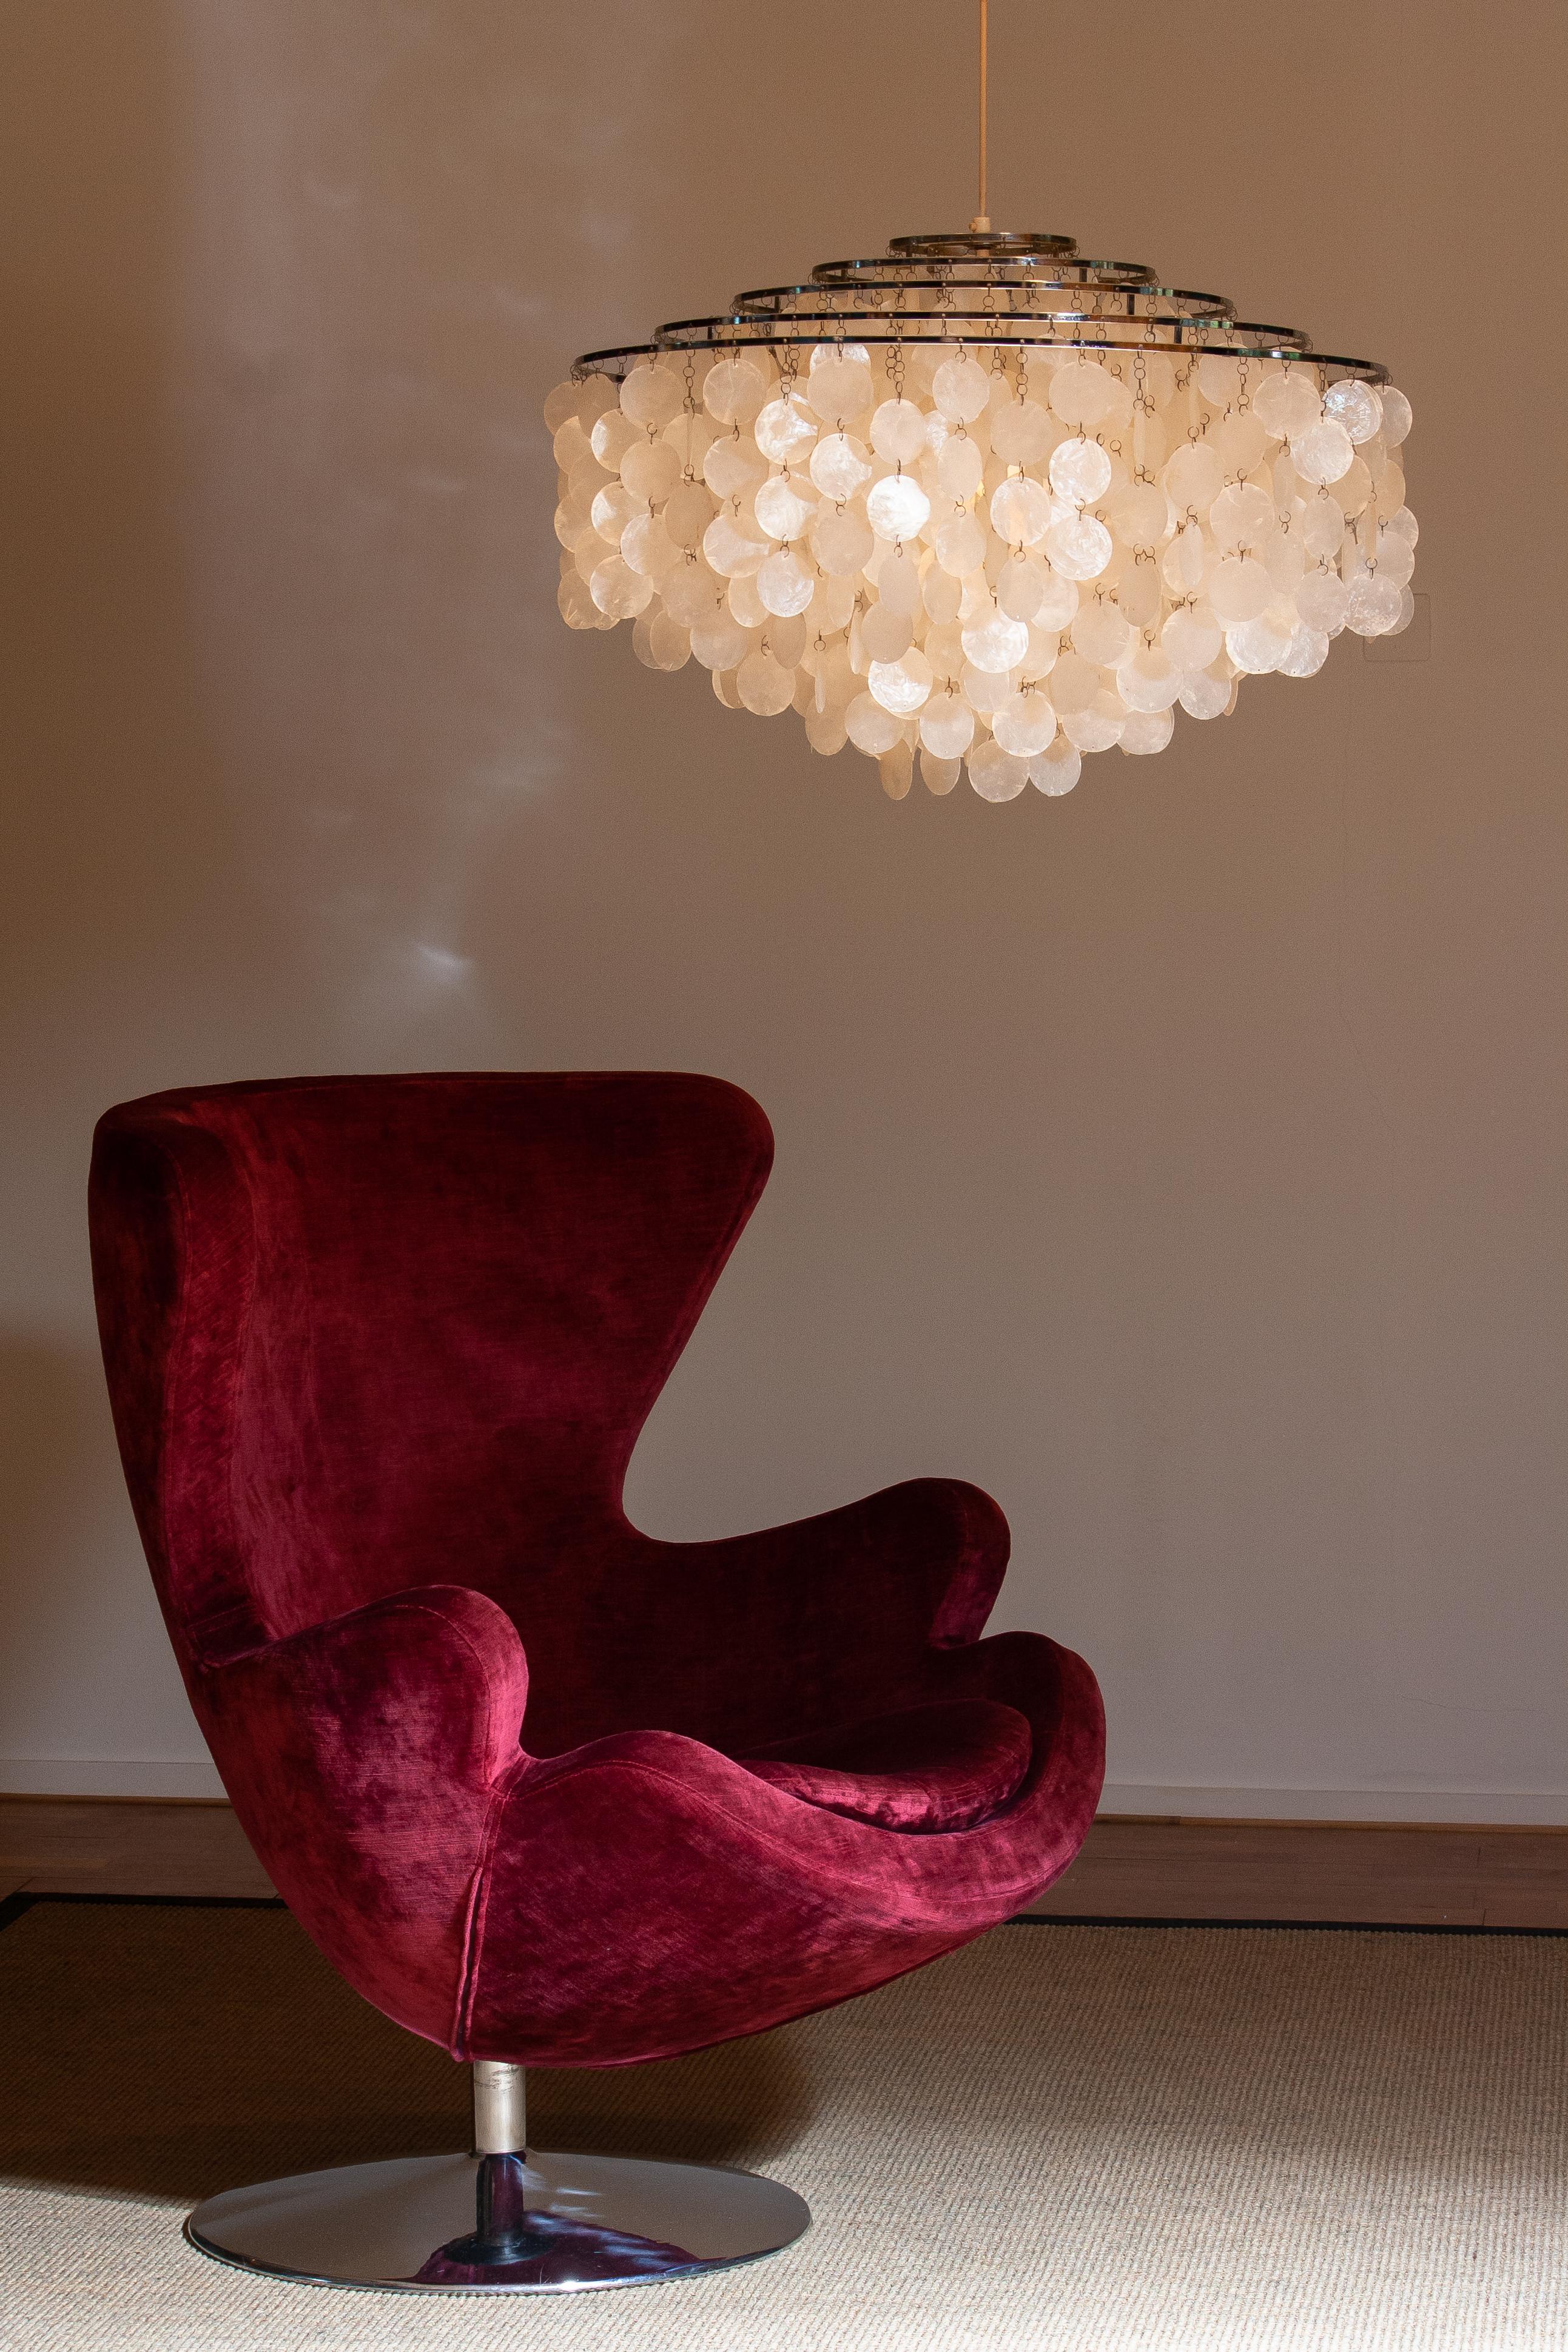 Pair of Extra Large Capiz Shell Chandeliers by Verner Panton for Luber AG. Swiss 3